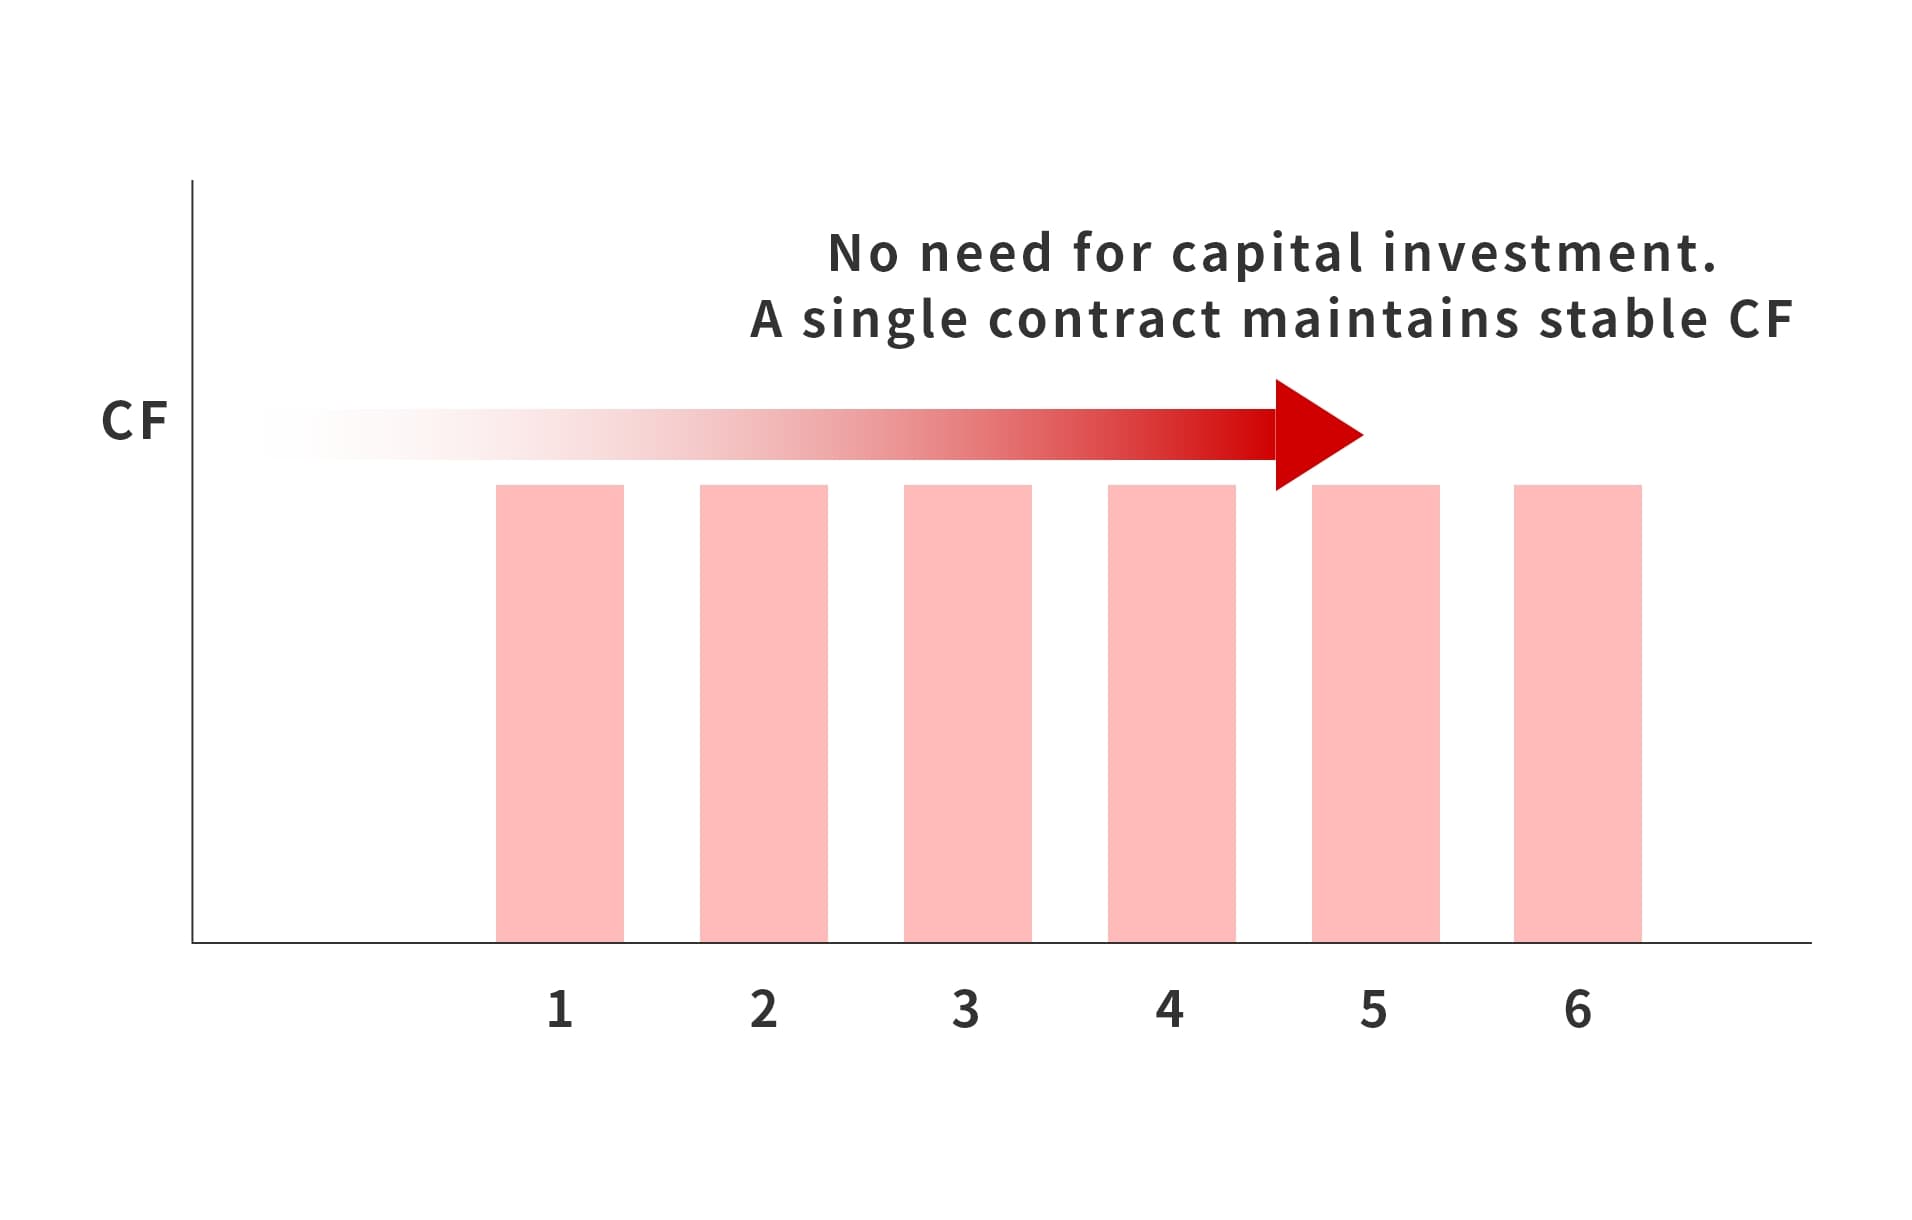 High ability to generate cash flow (CF) due to asset-light business